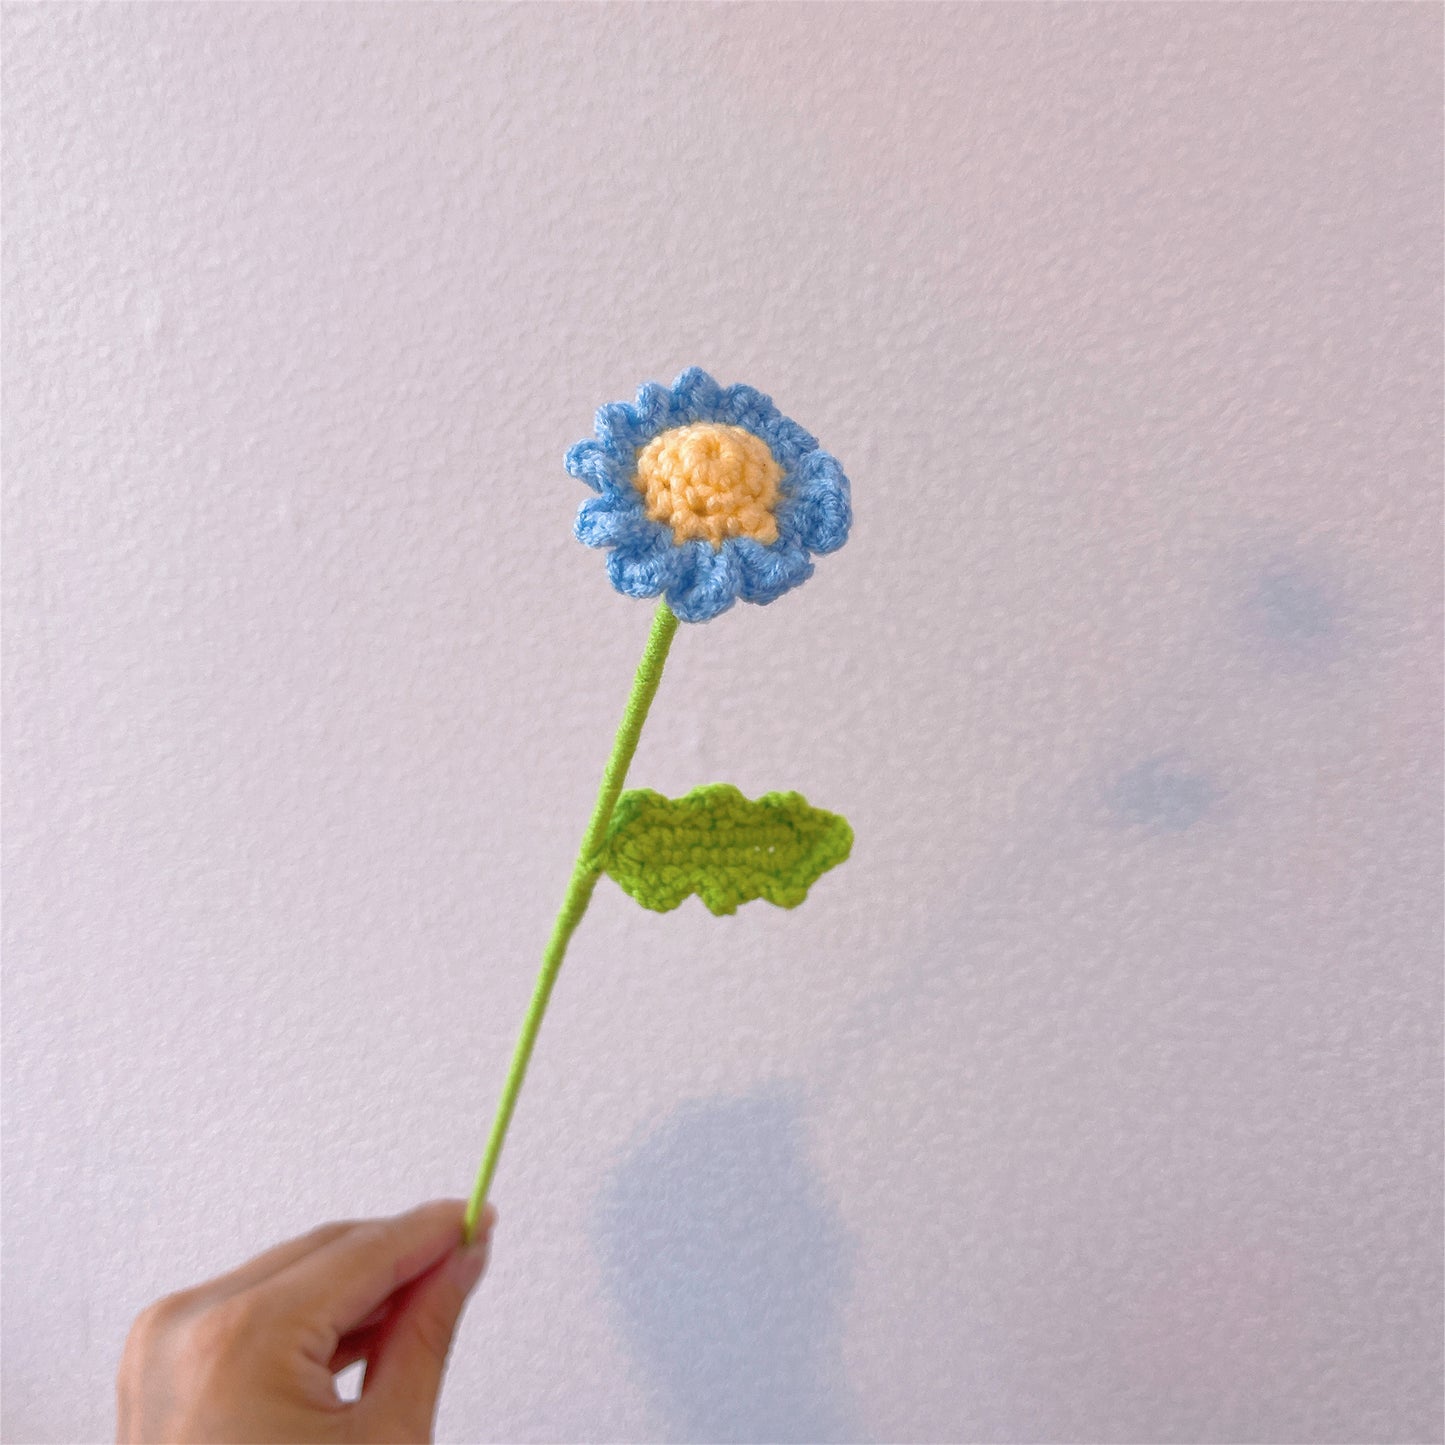 Sunny Meadow: Handcrafted Crochet Small Daisies Stake for a Cheerful Garden Decor